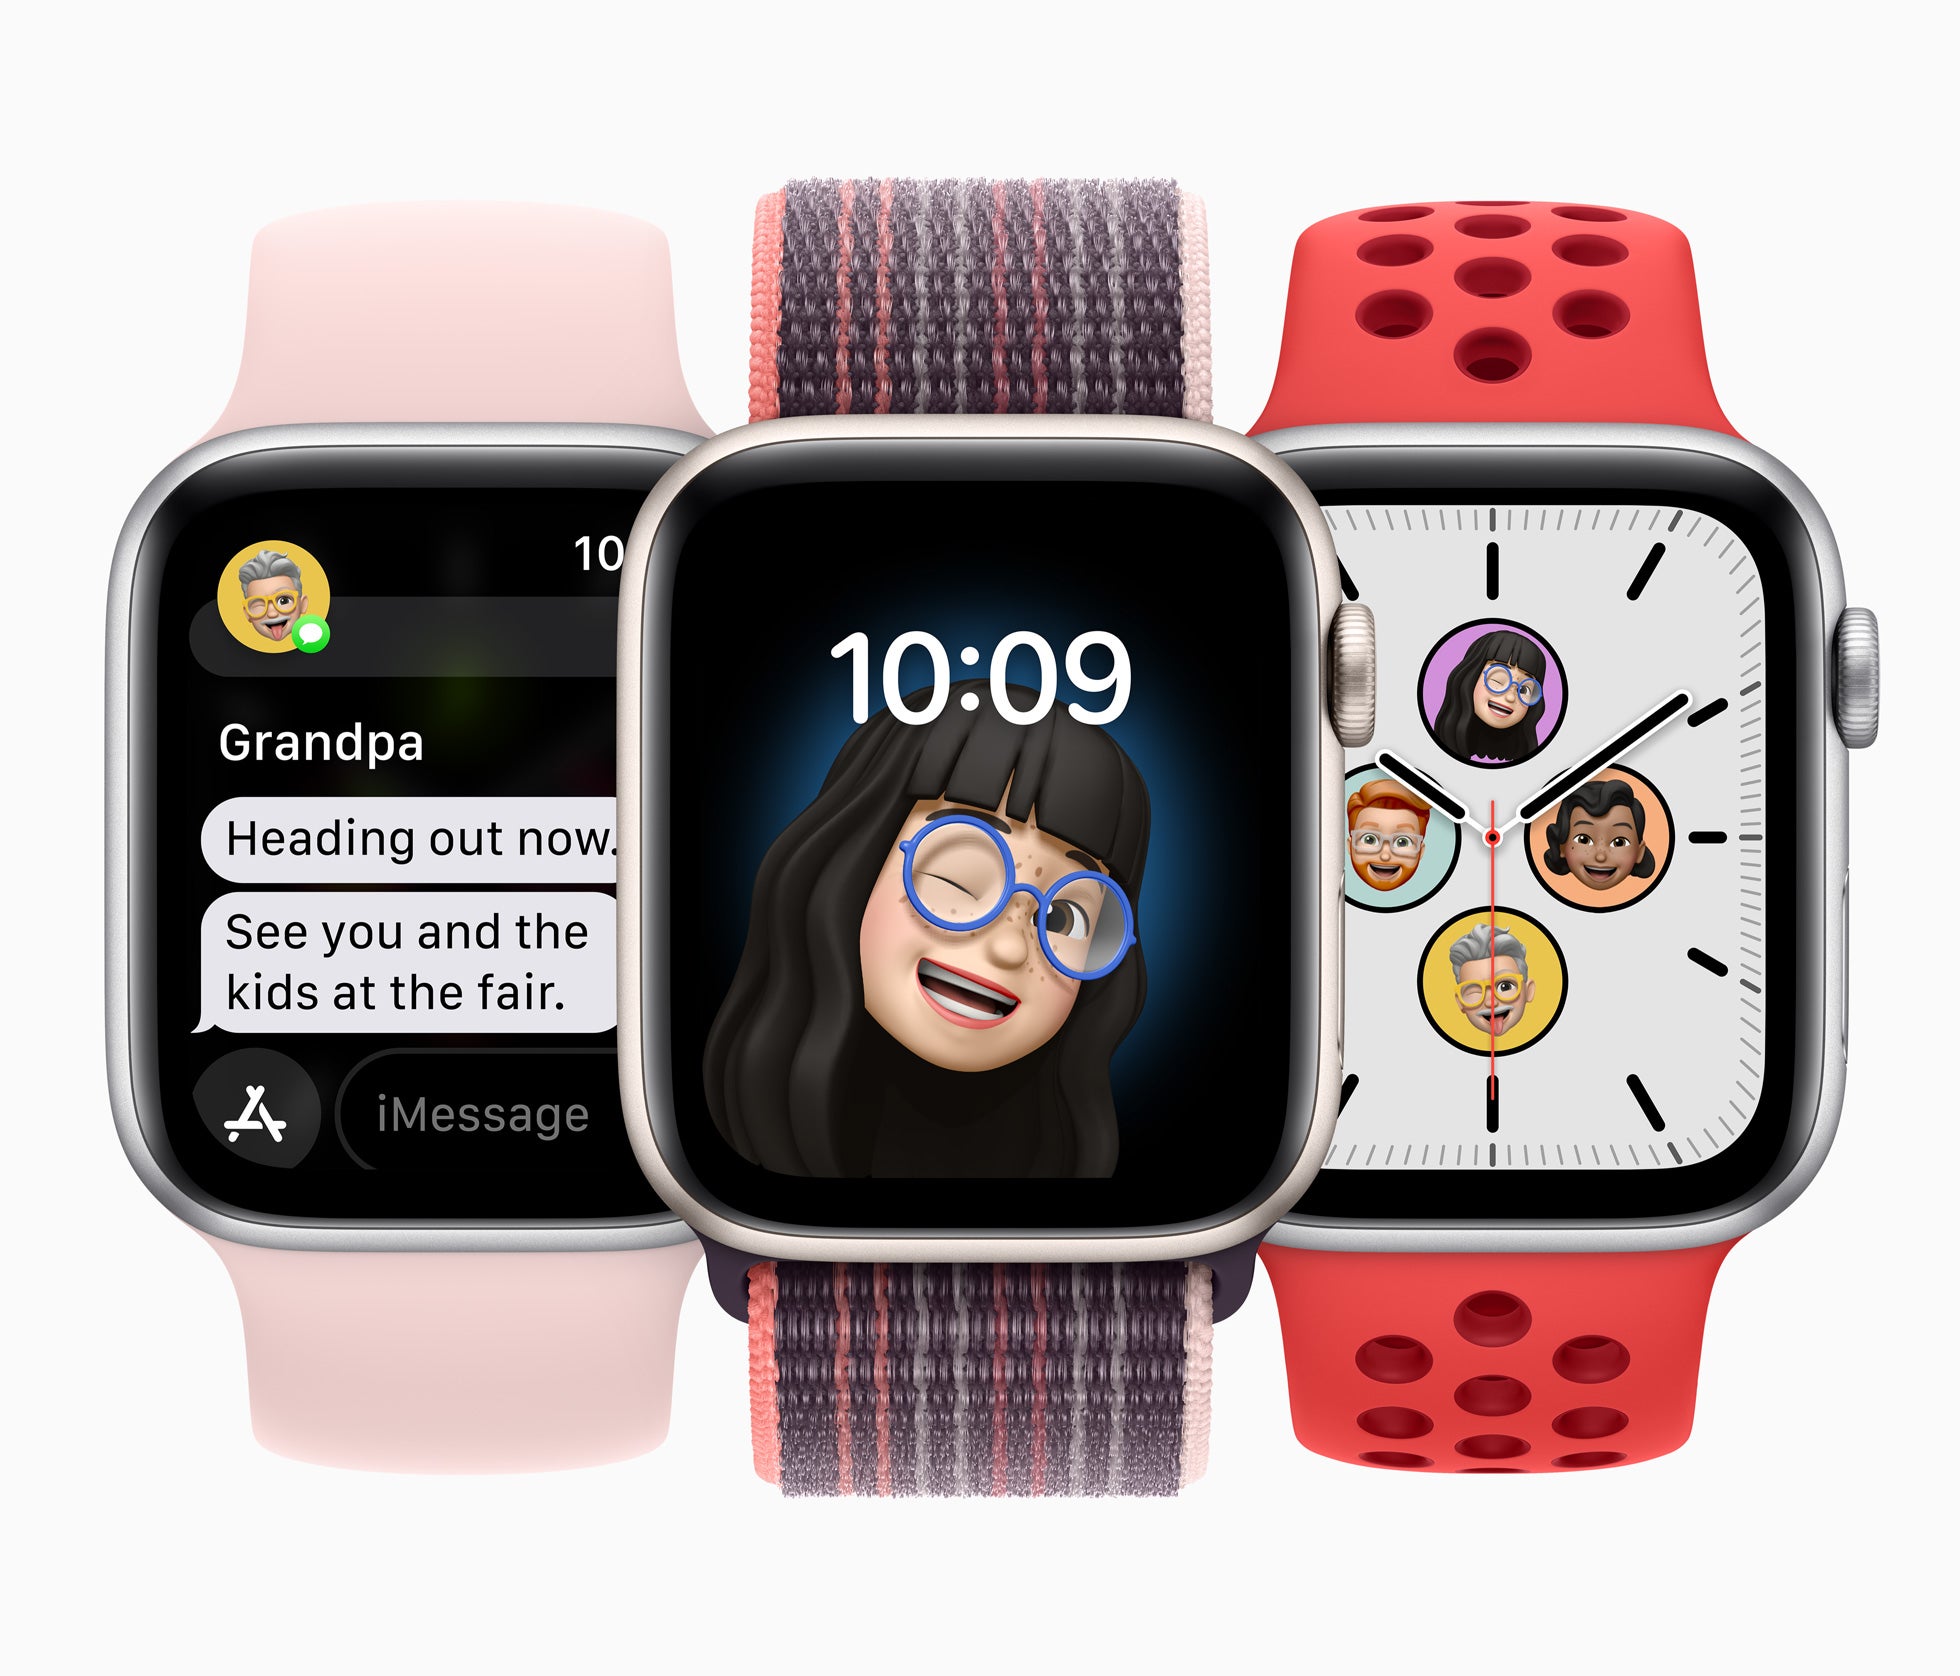 Apple watches in pink, purple and red